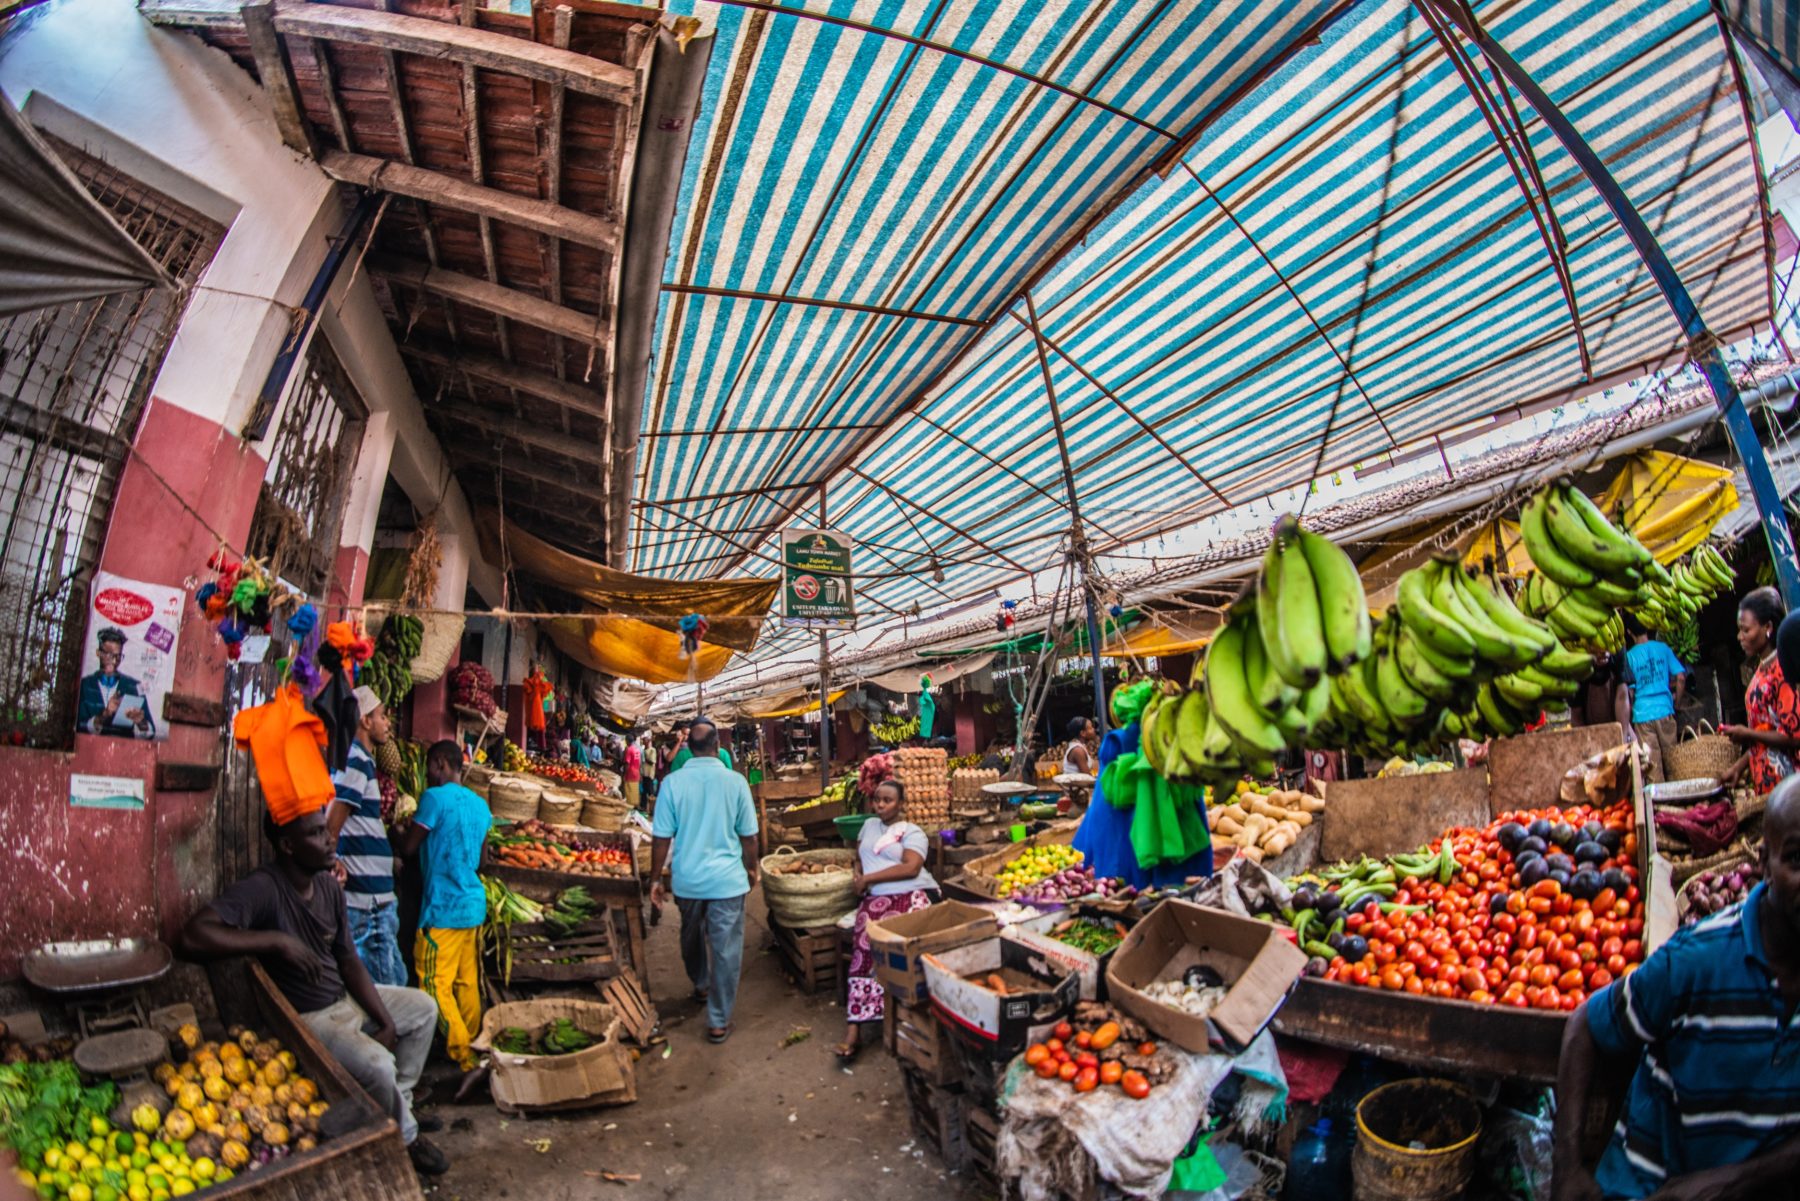 A Kenyan marketplace with fruits and vegetables filling the stalls.